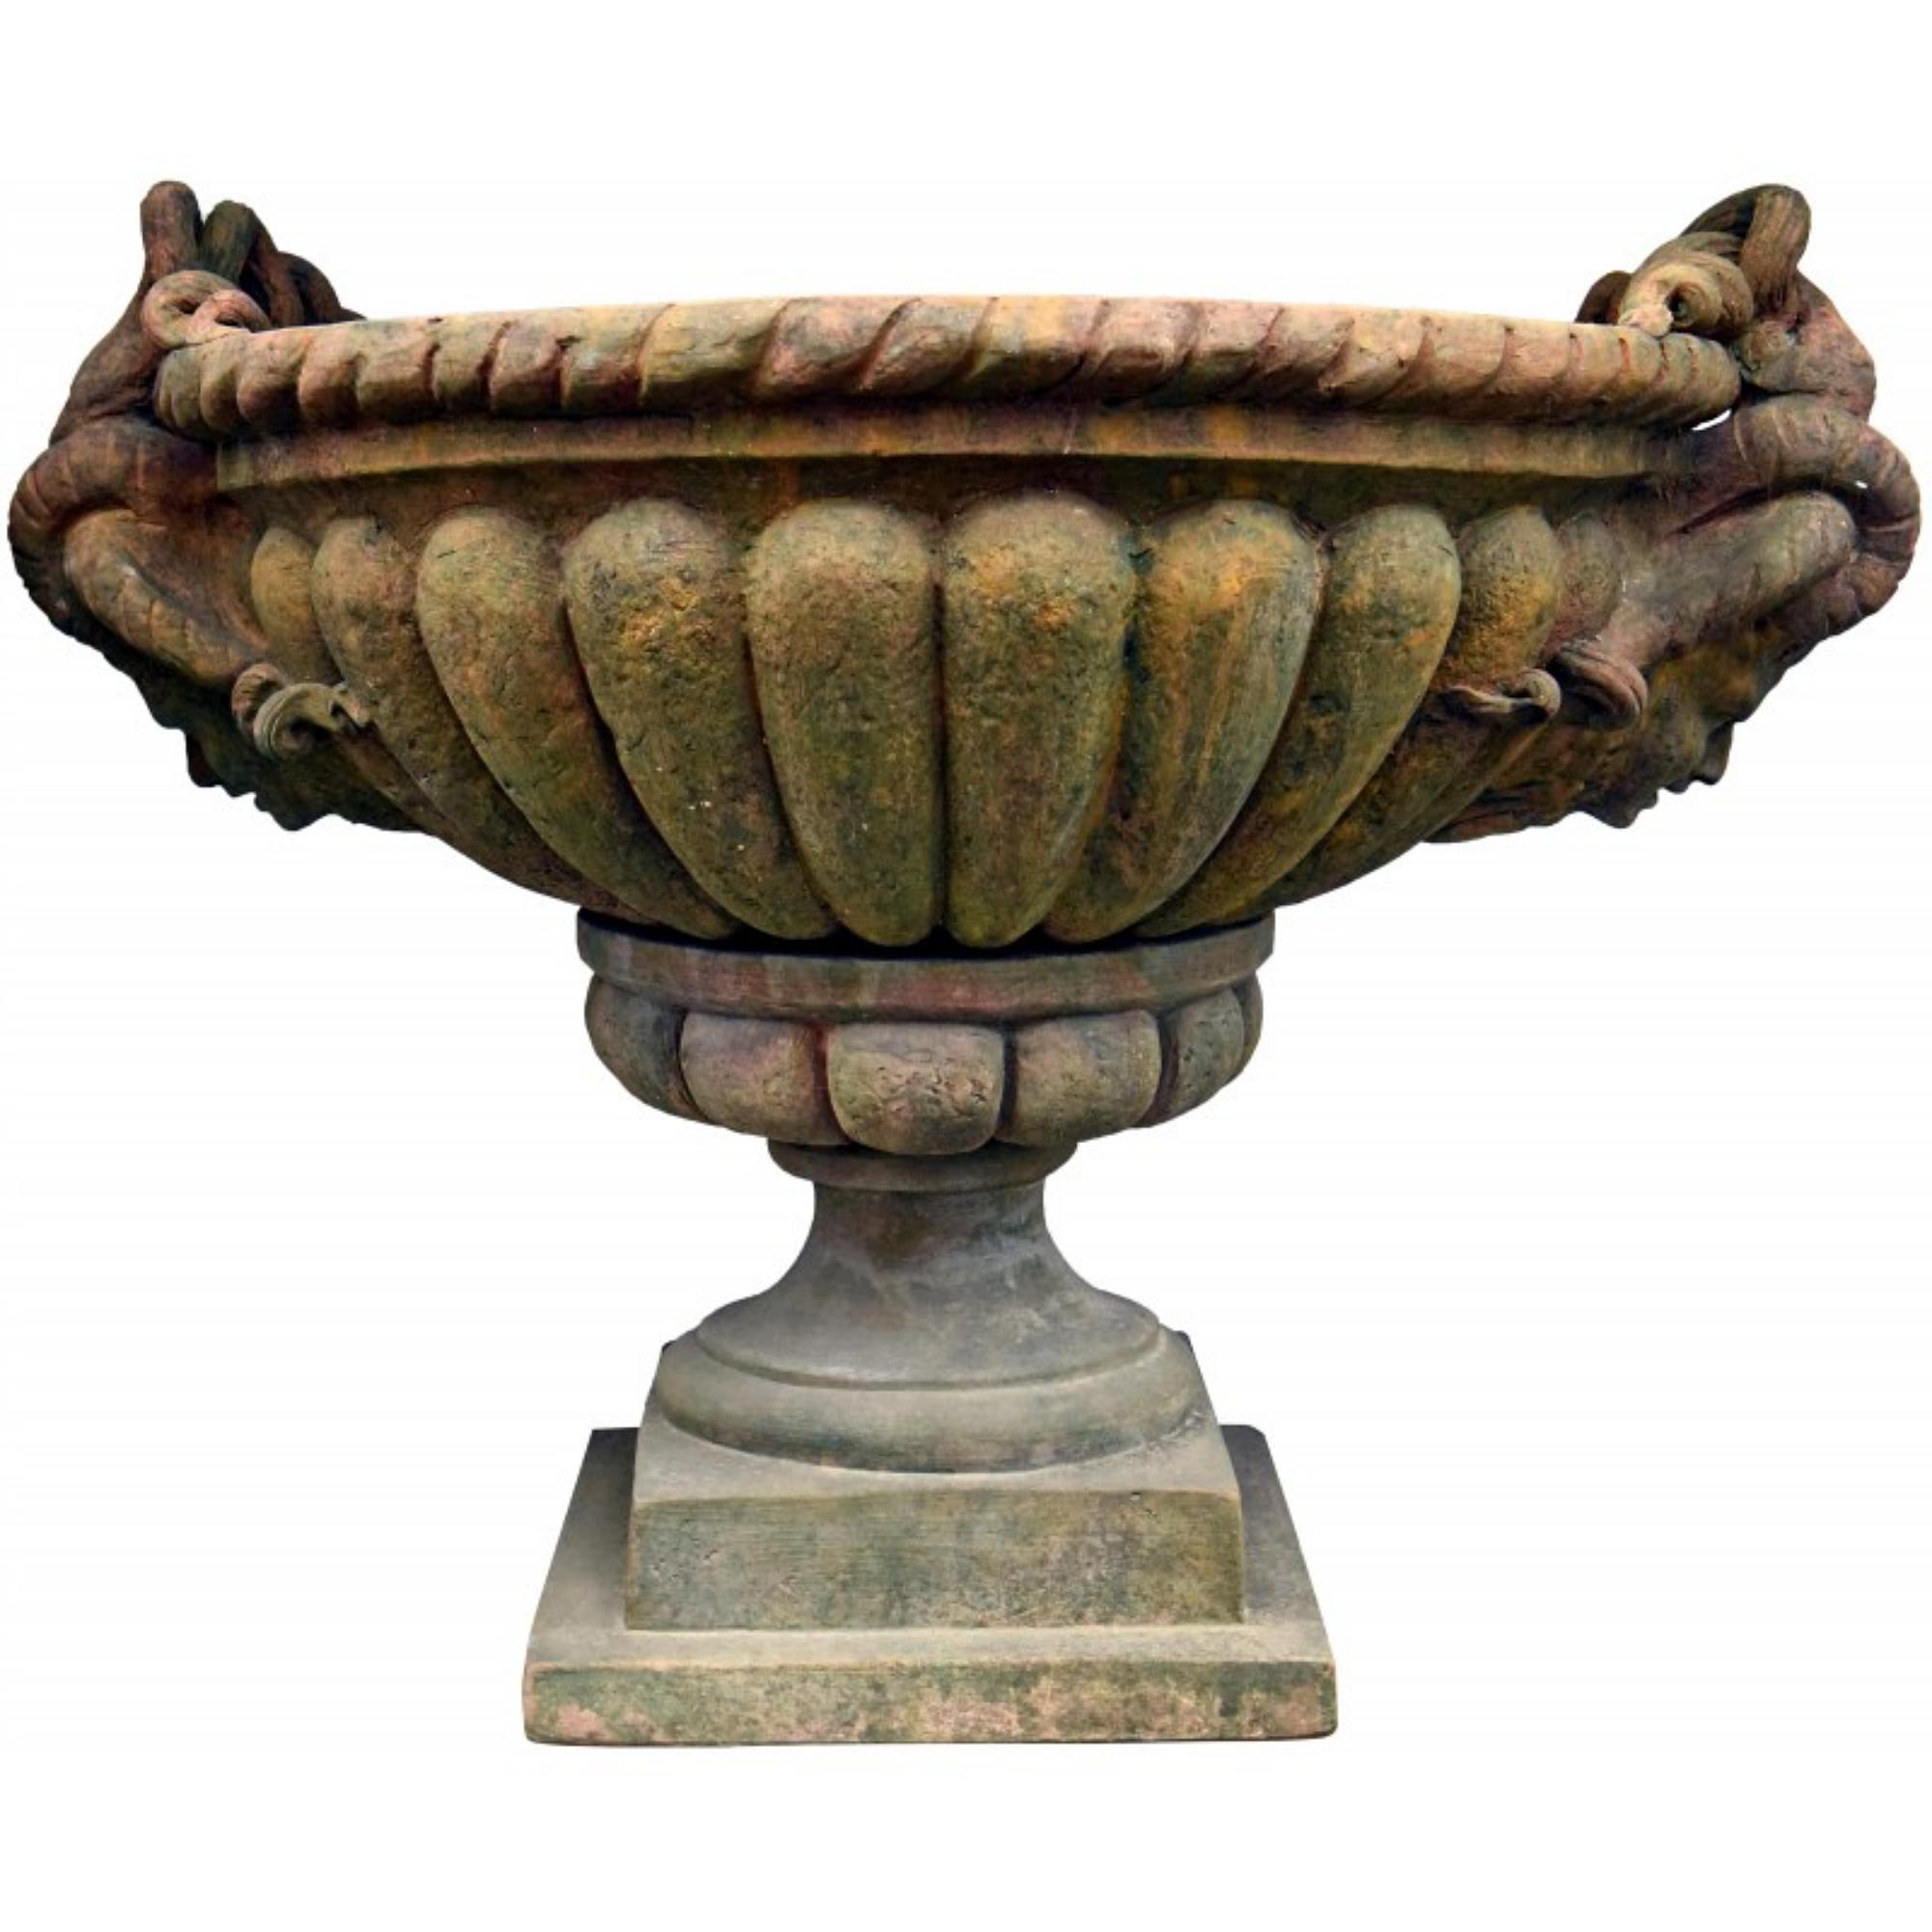 Classical Roman Pair of Baccellato Vases with Medusa Heads Terracotta Goblet, 19th Century For Sale